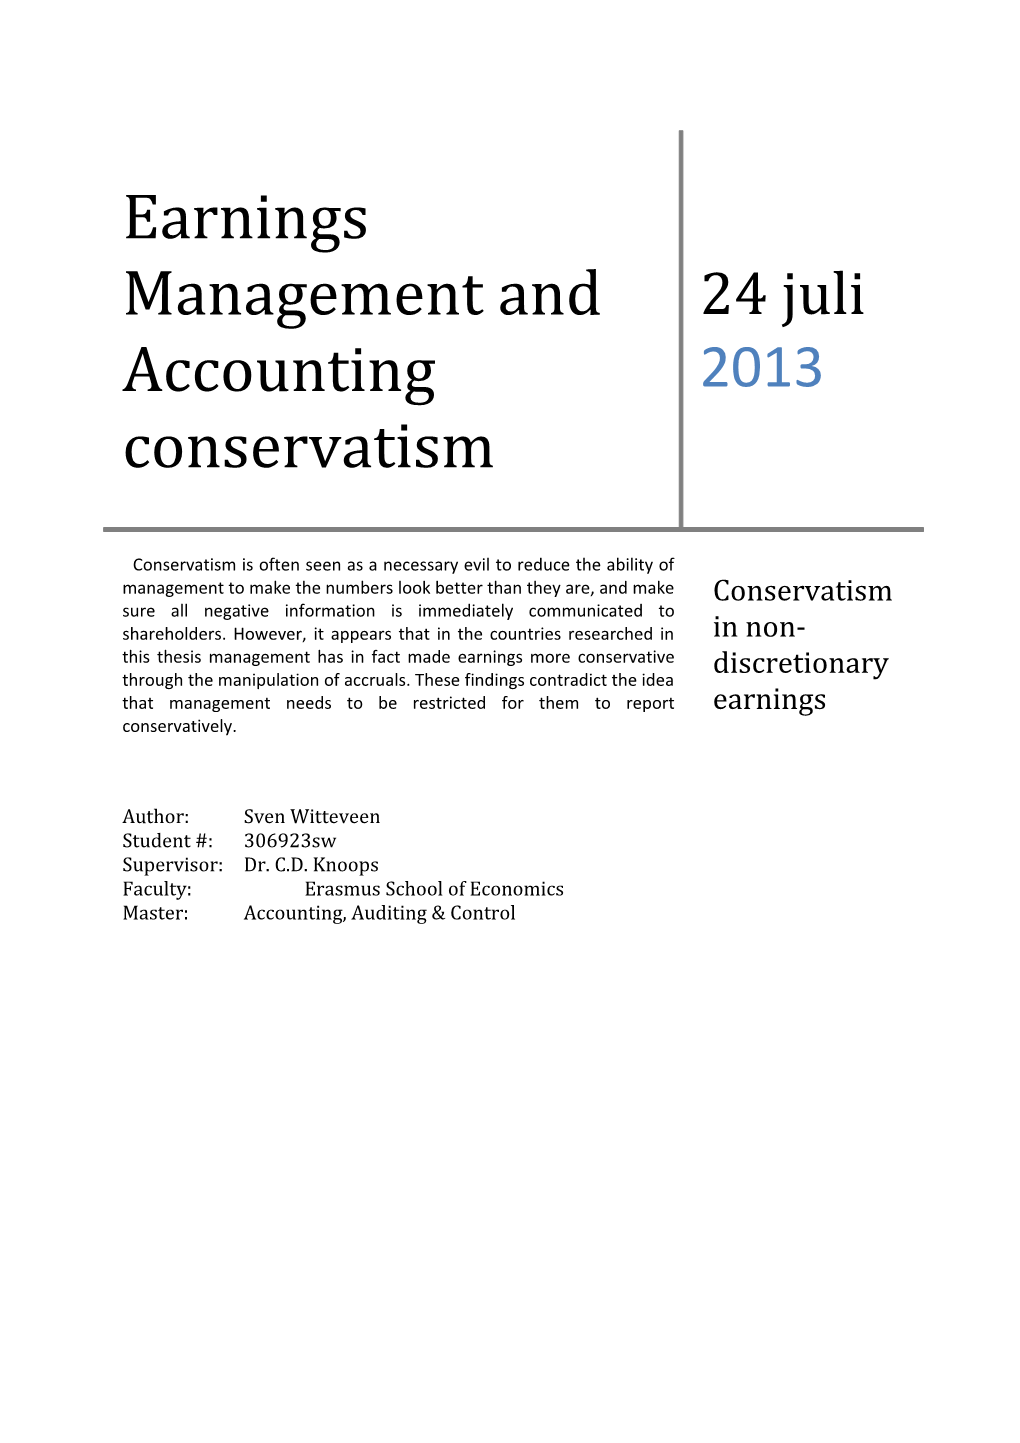 Earnings Management and Accounting Conservatism